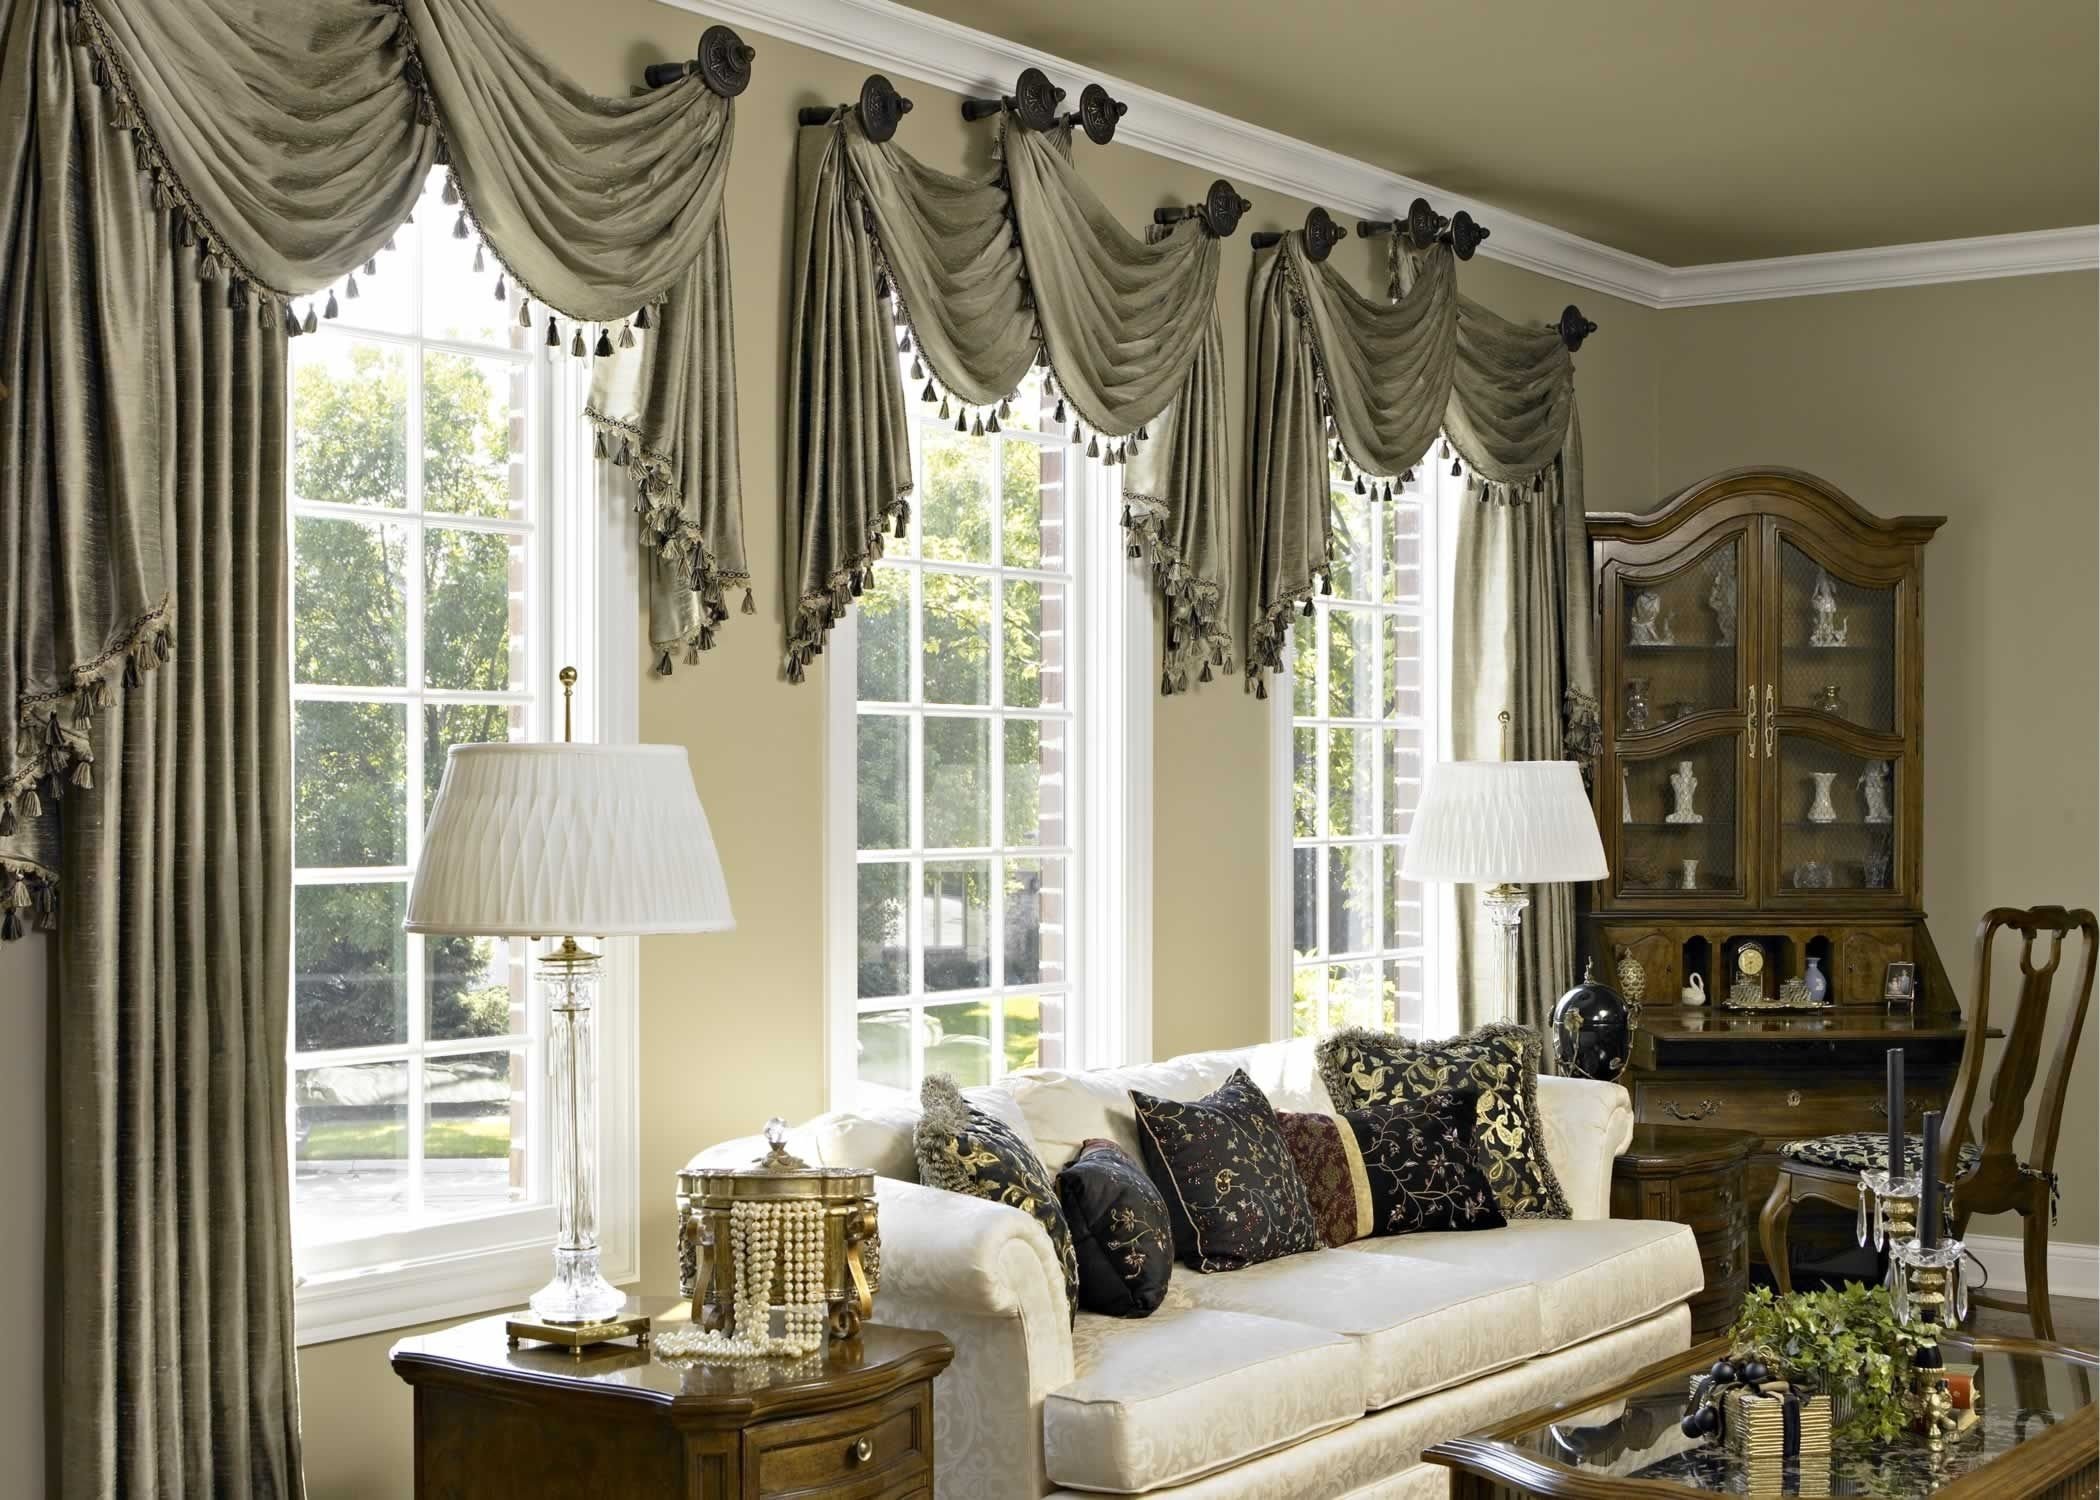 10 Stylish Curtains Ideas For Living Room need to have some working window treatment ideas we have them 7 2022